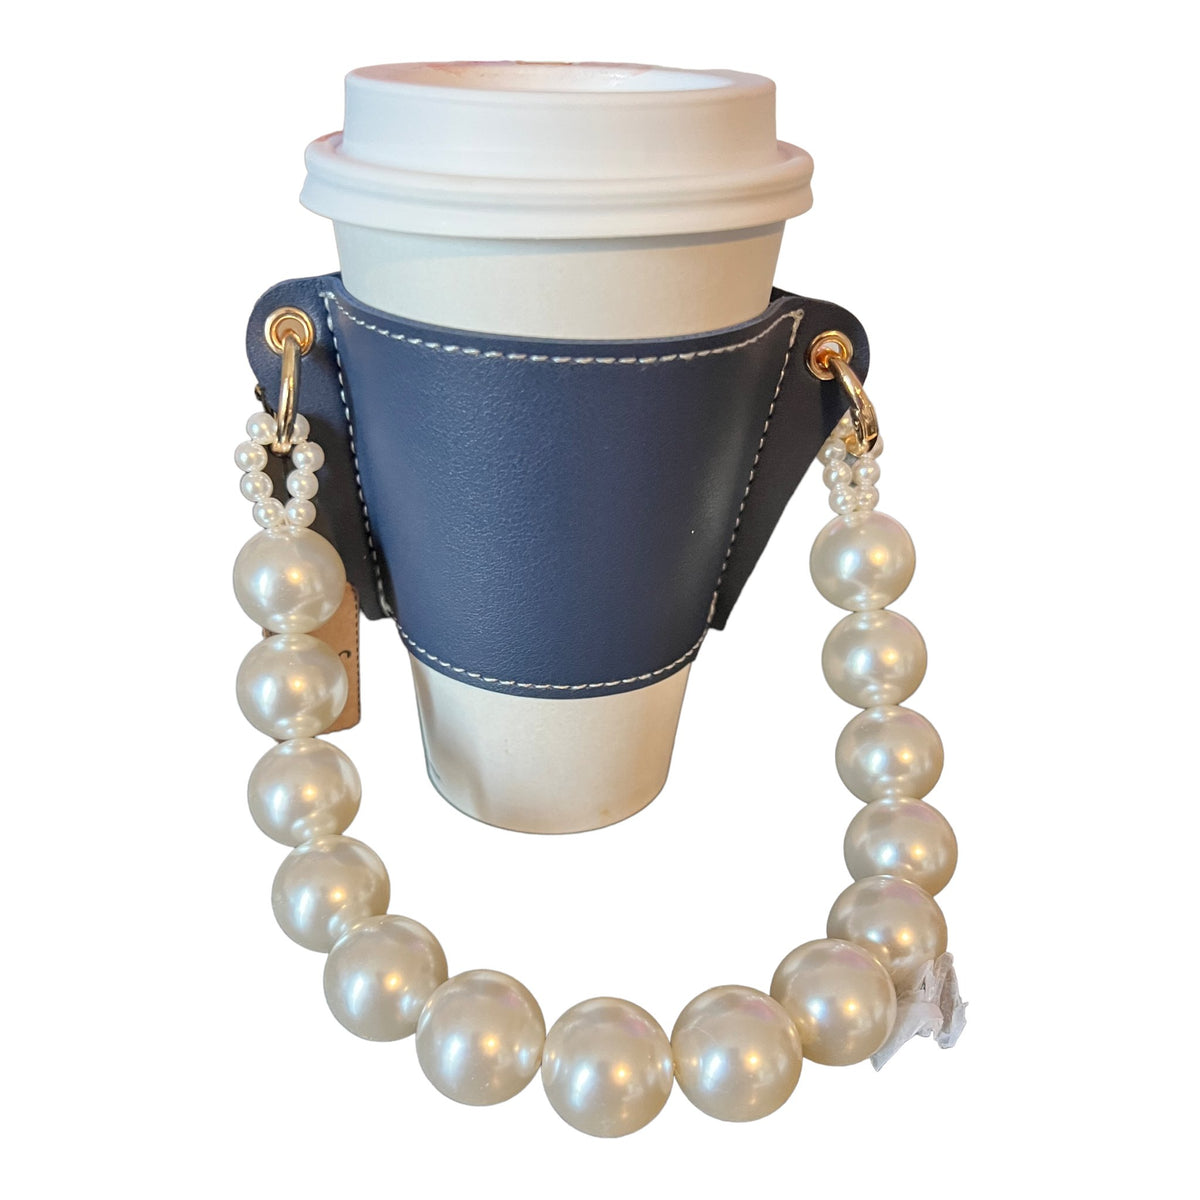 https://fabulouslydressedboutique.com/cdn/shop/products/coffee-cup-sleeve-with-resin-chain-strap-216535.jpg?v=1691542390&width=1200